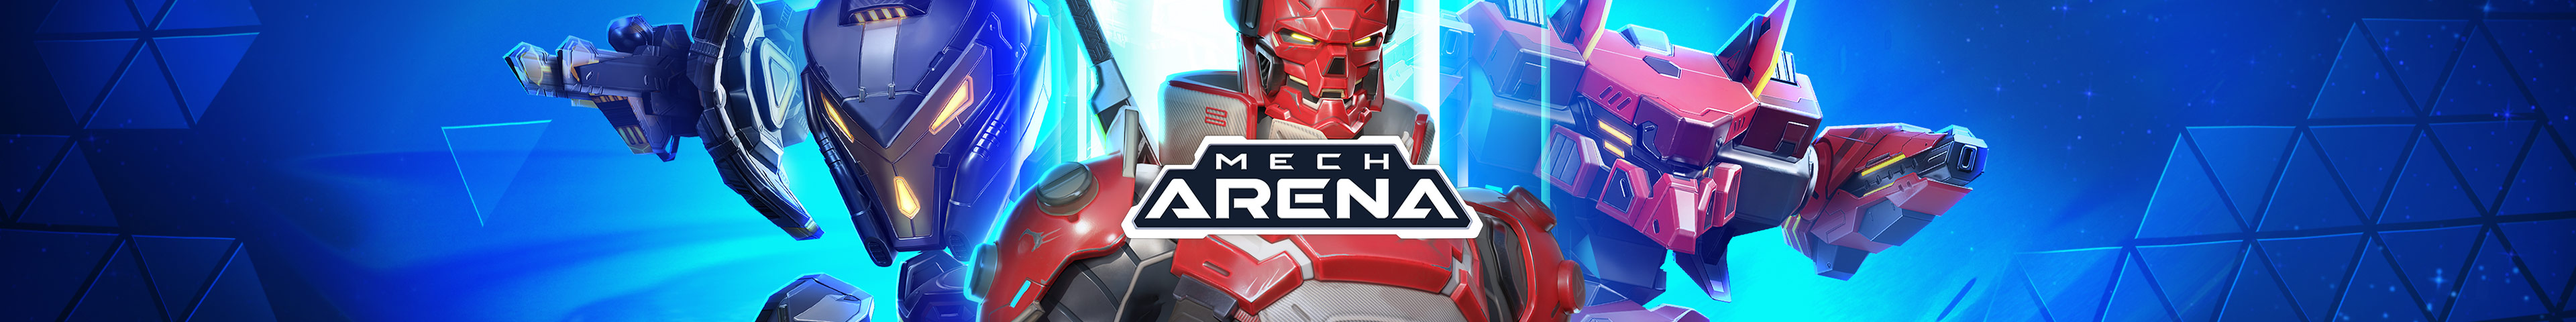 Mech Arena | Update Preview | Visual Redesign